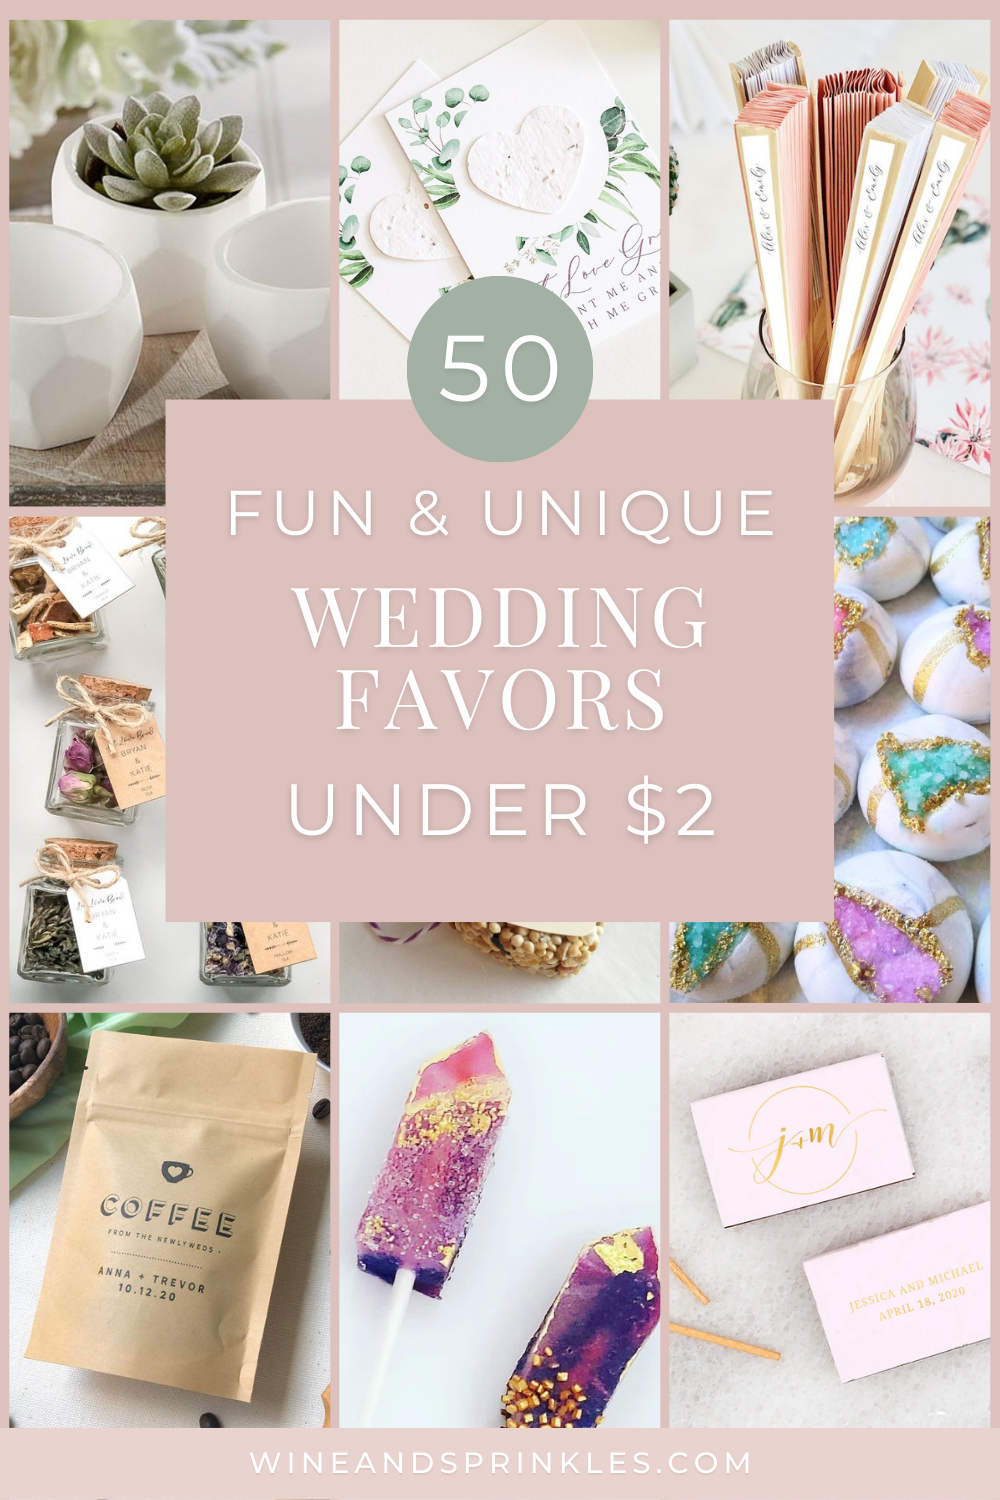 50 Fun and Unique Wedding Favors Under $2 — Wine & Sprinkles